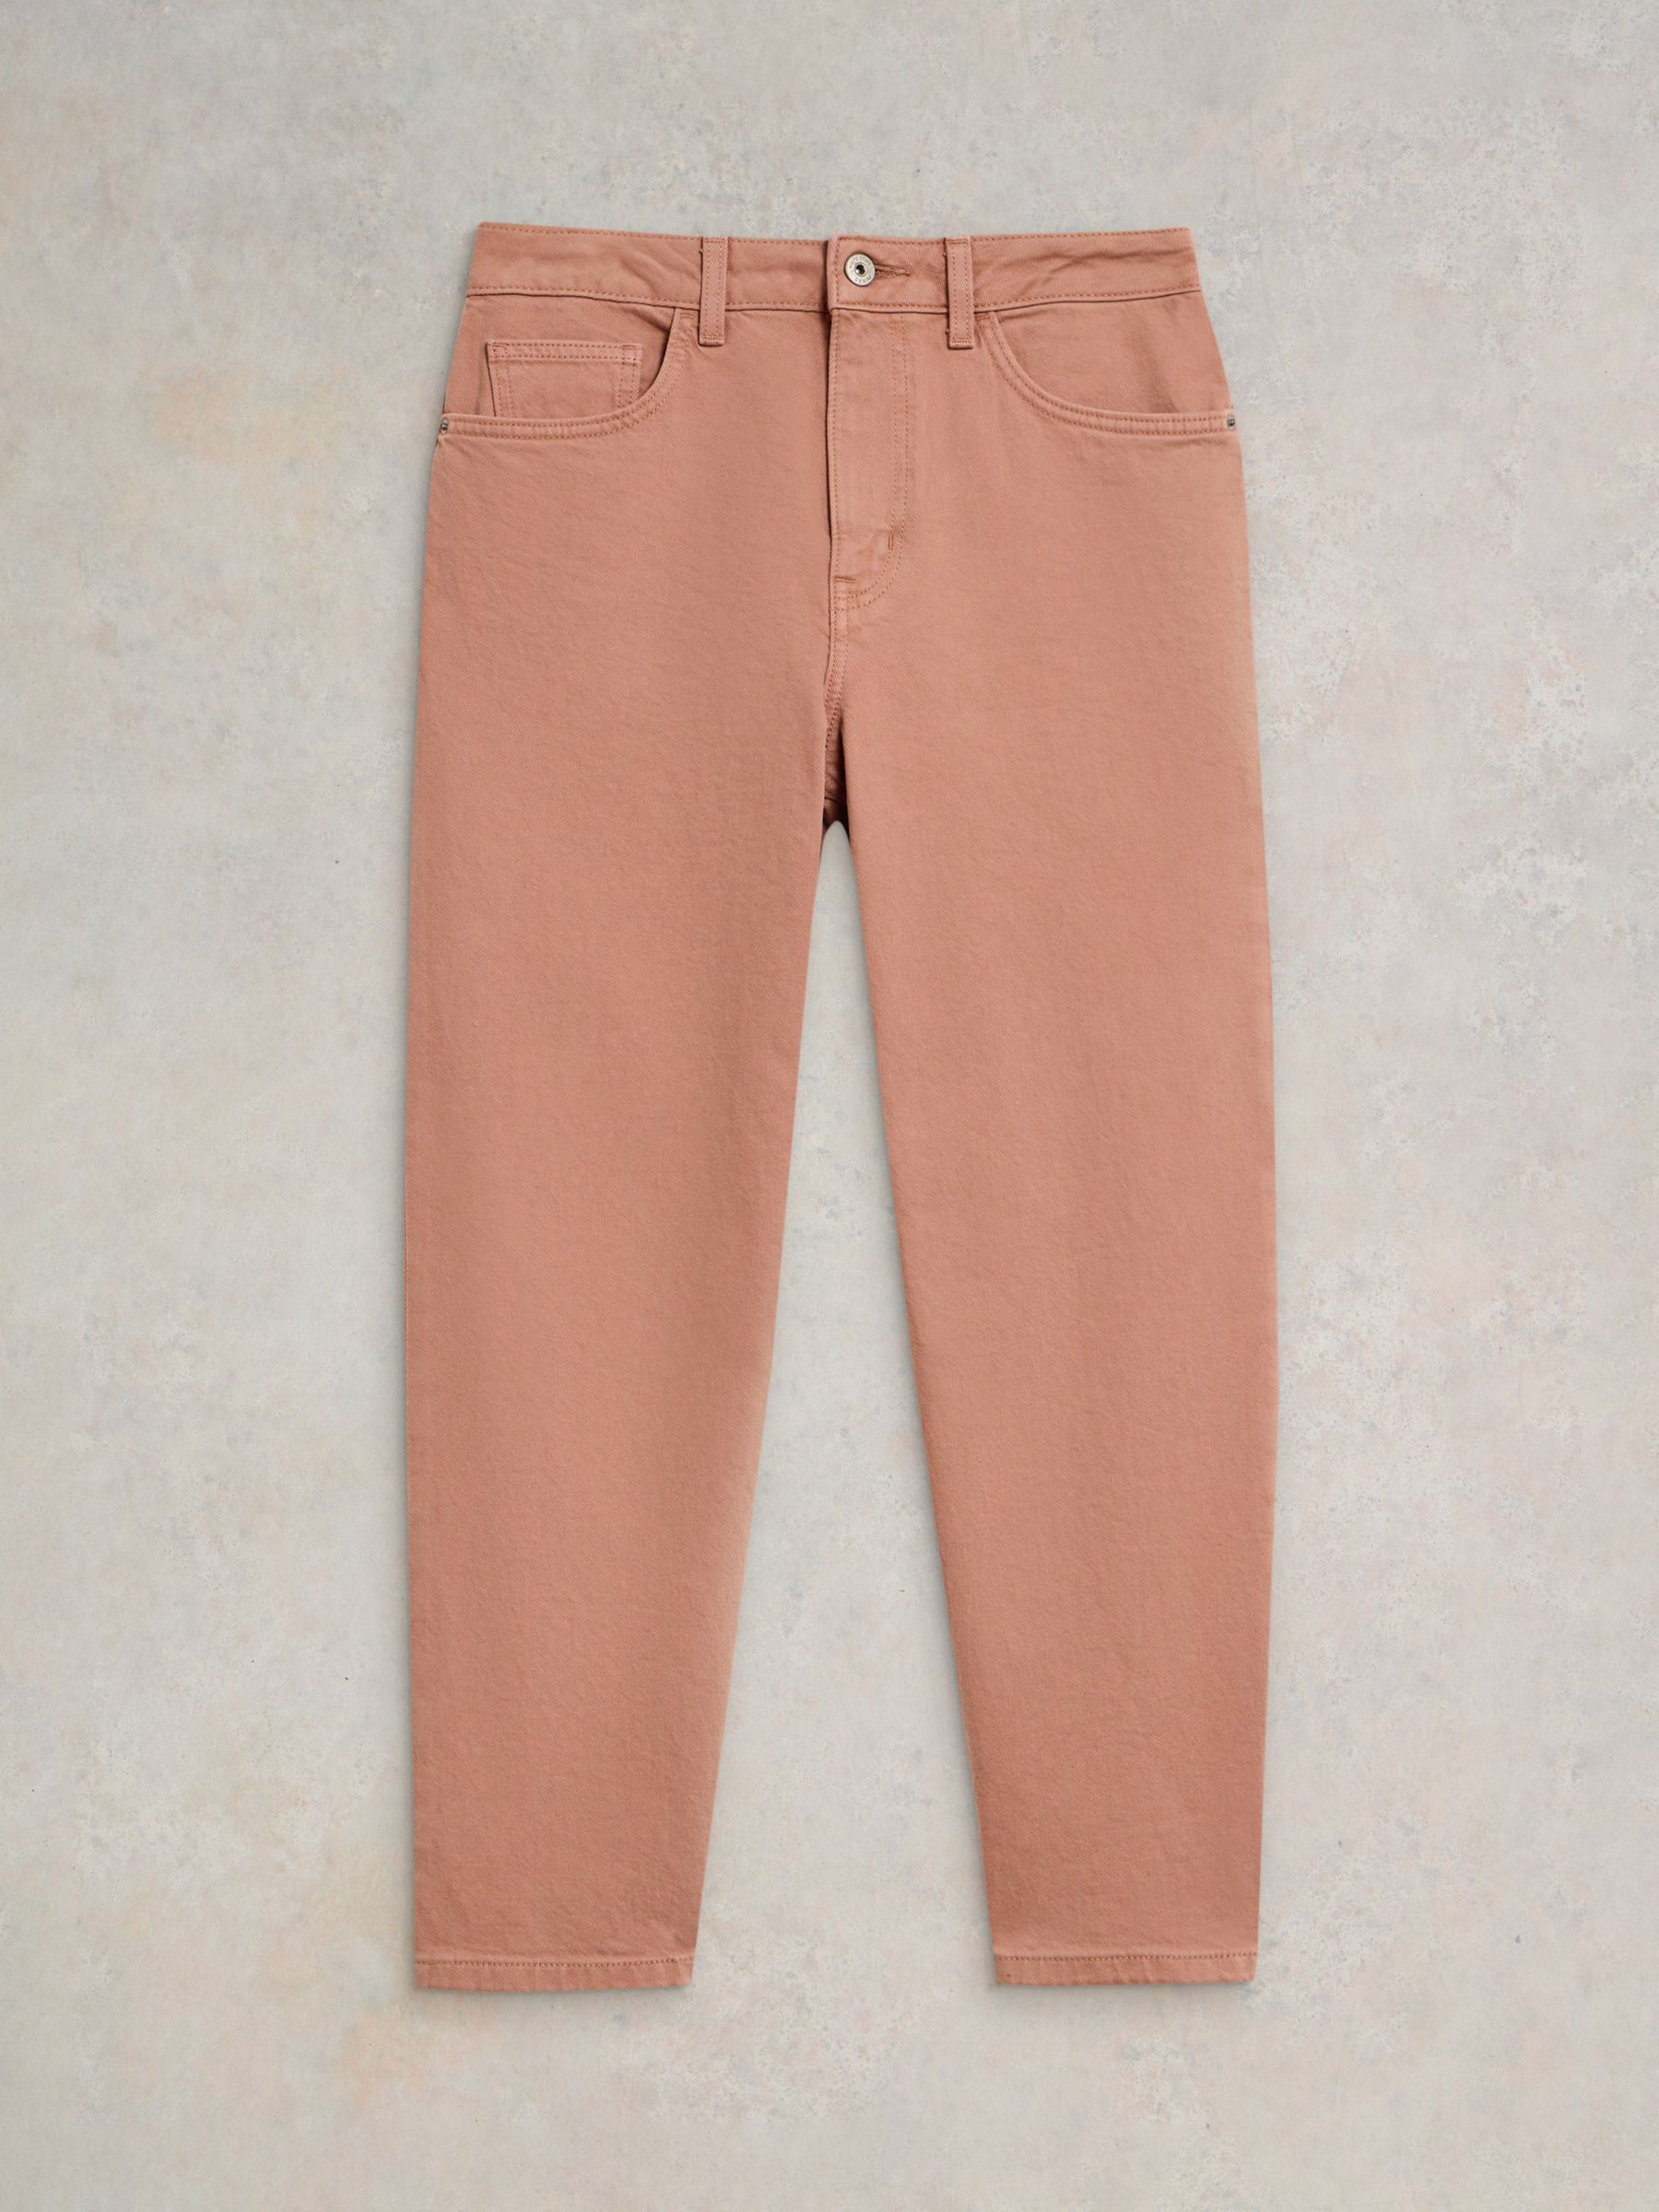 Buy White Stuff Charlie Ankle Grazer Jeans, Dusty Pink Online at johnlewis.com